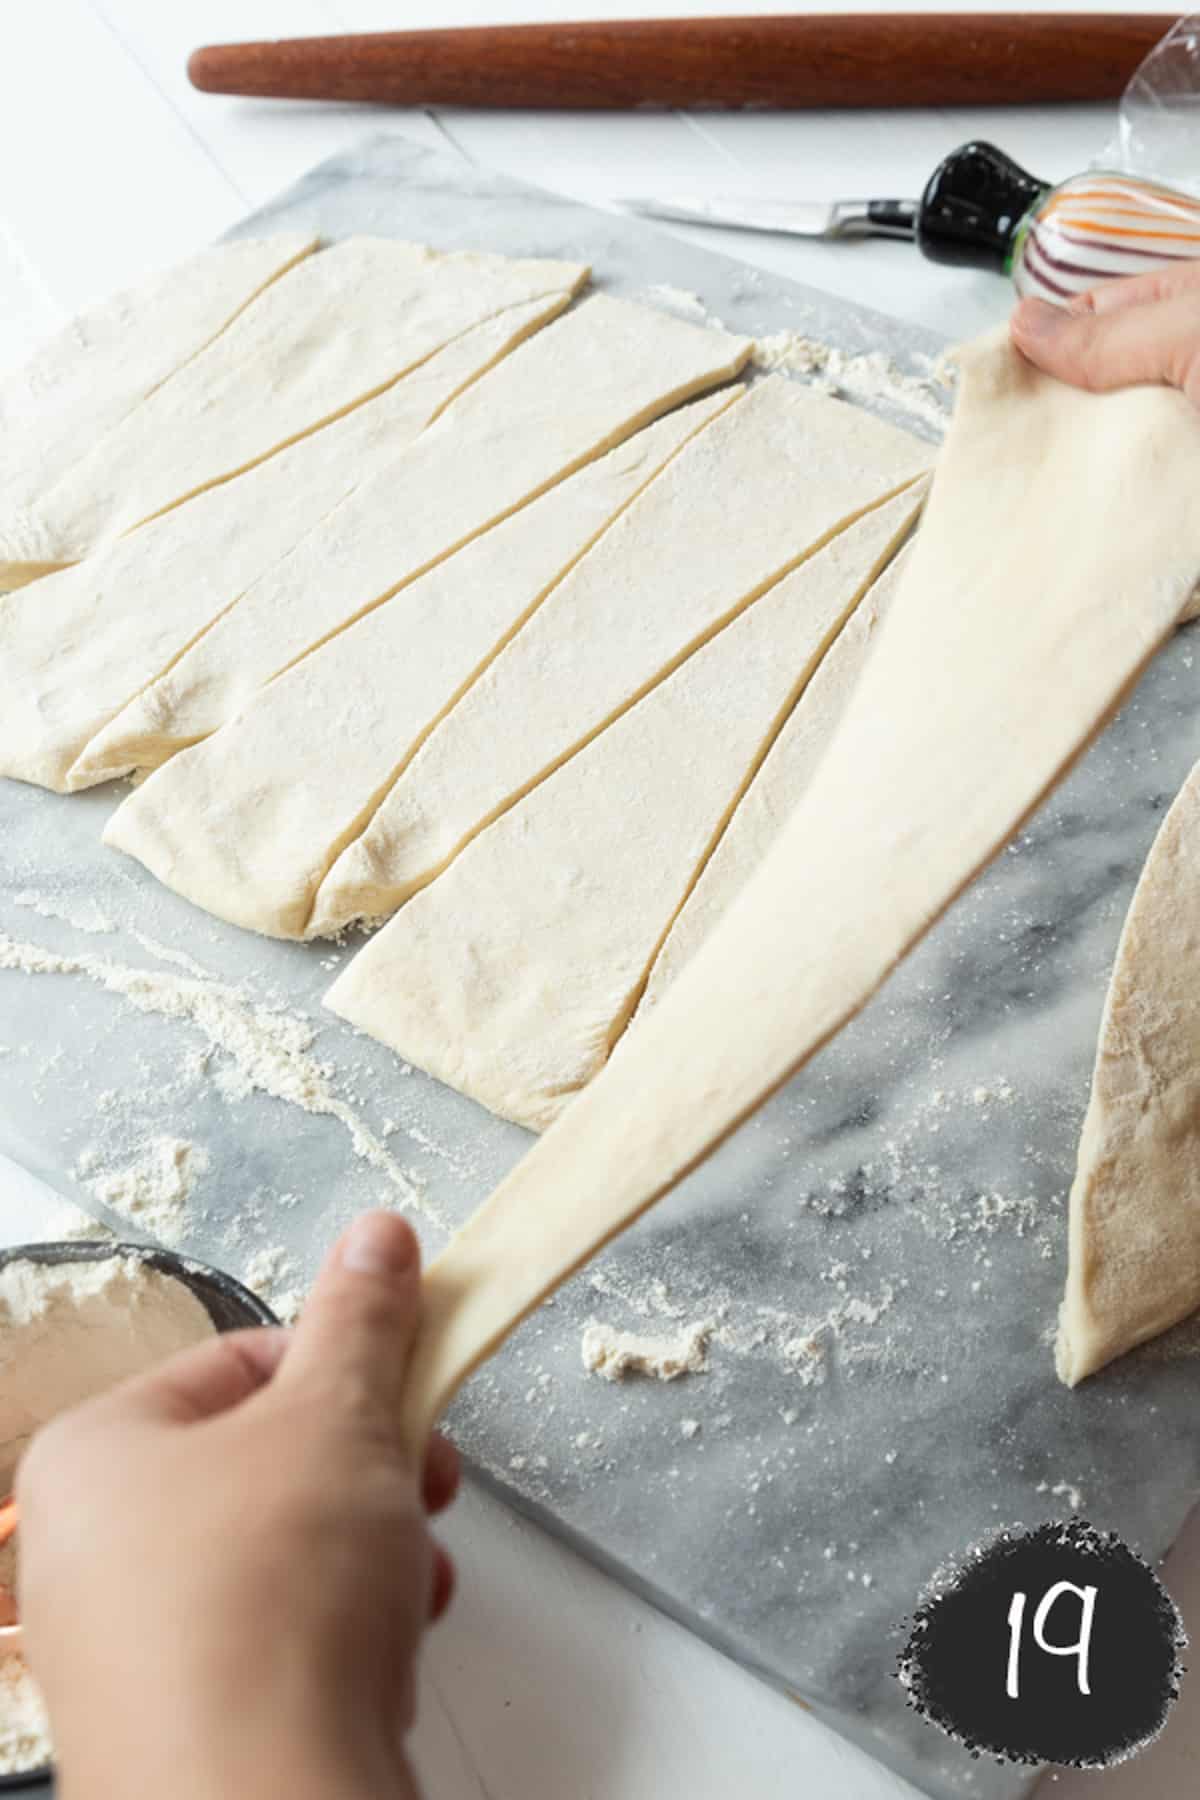 2 hands stretching a triangle of dough.